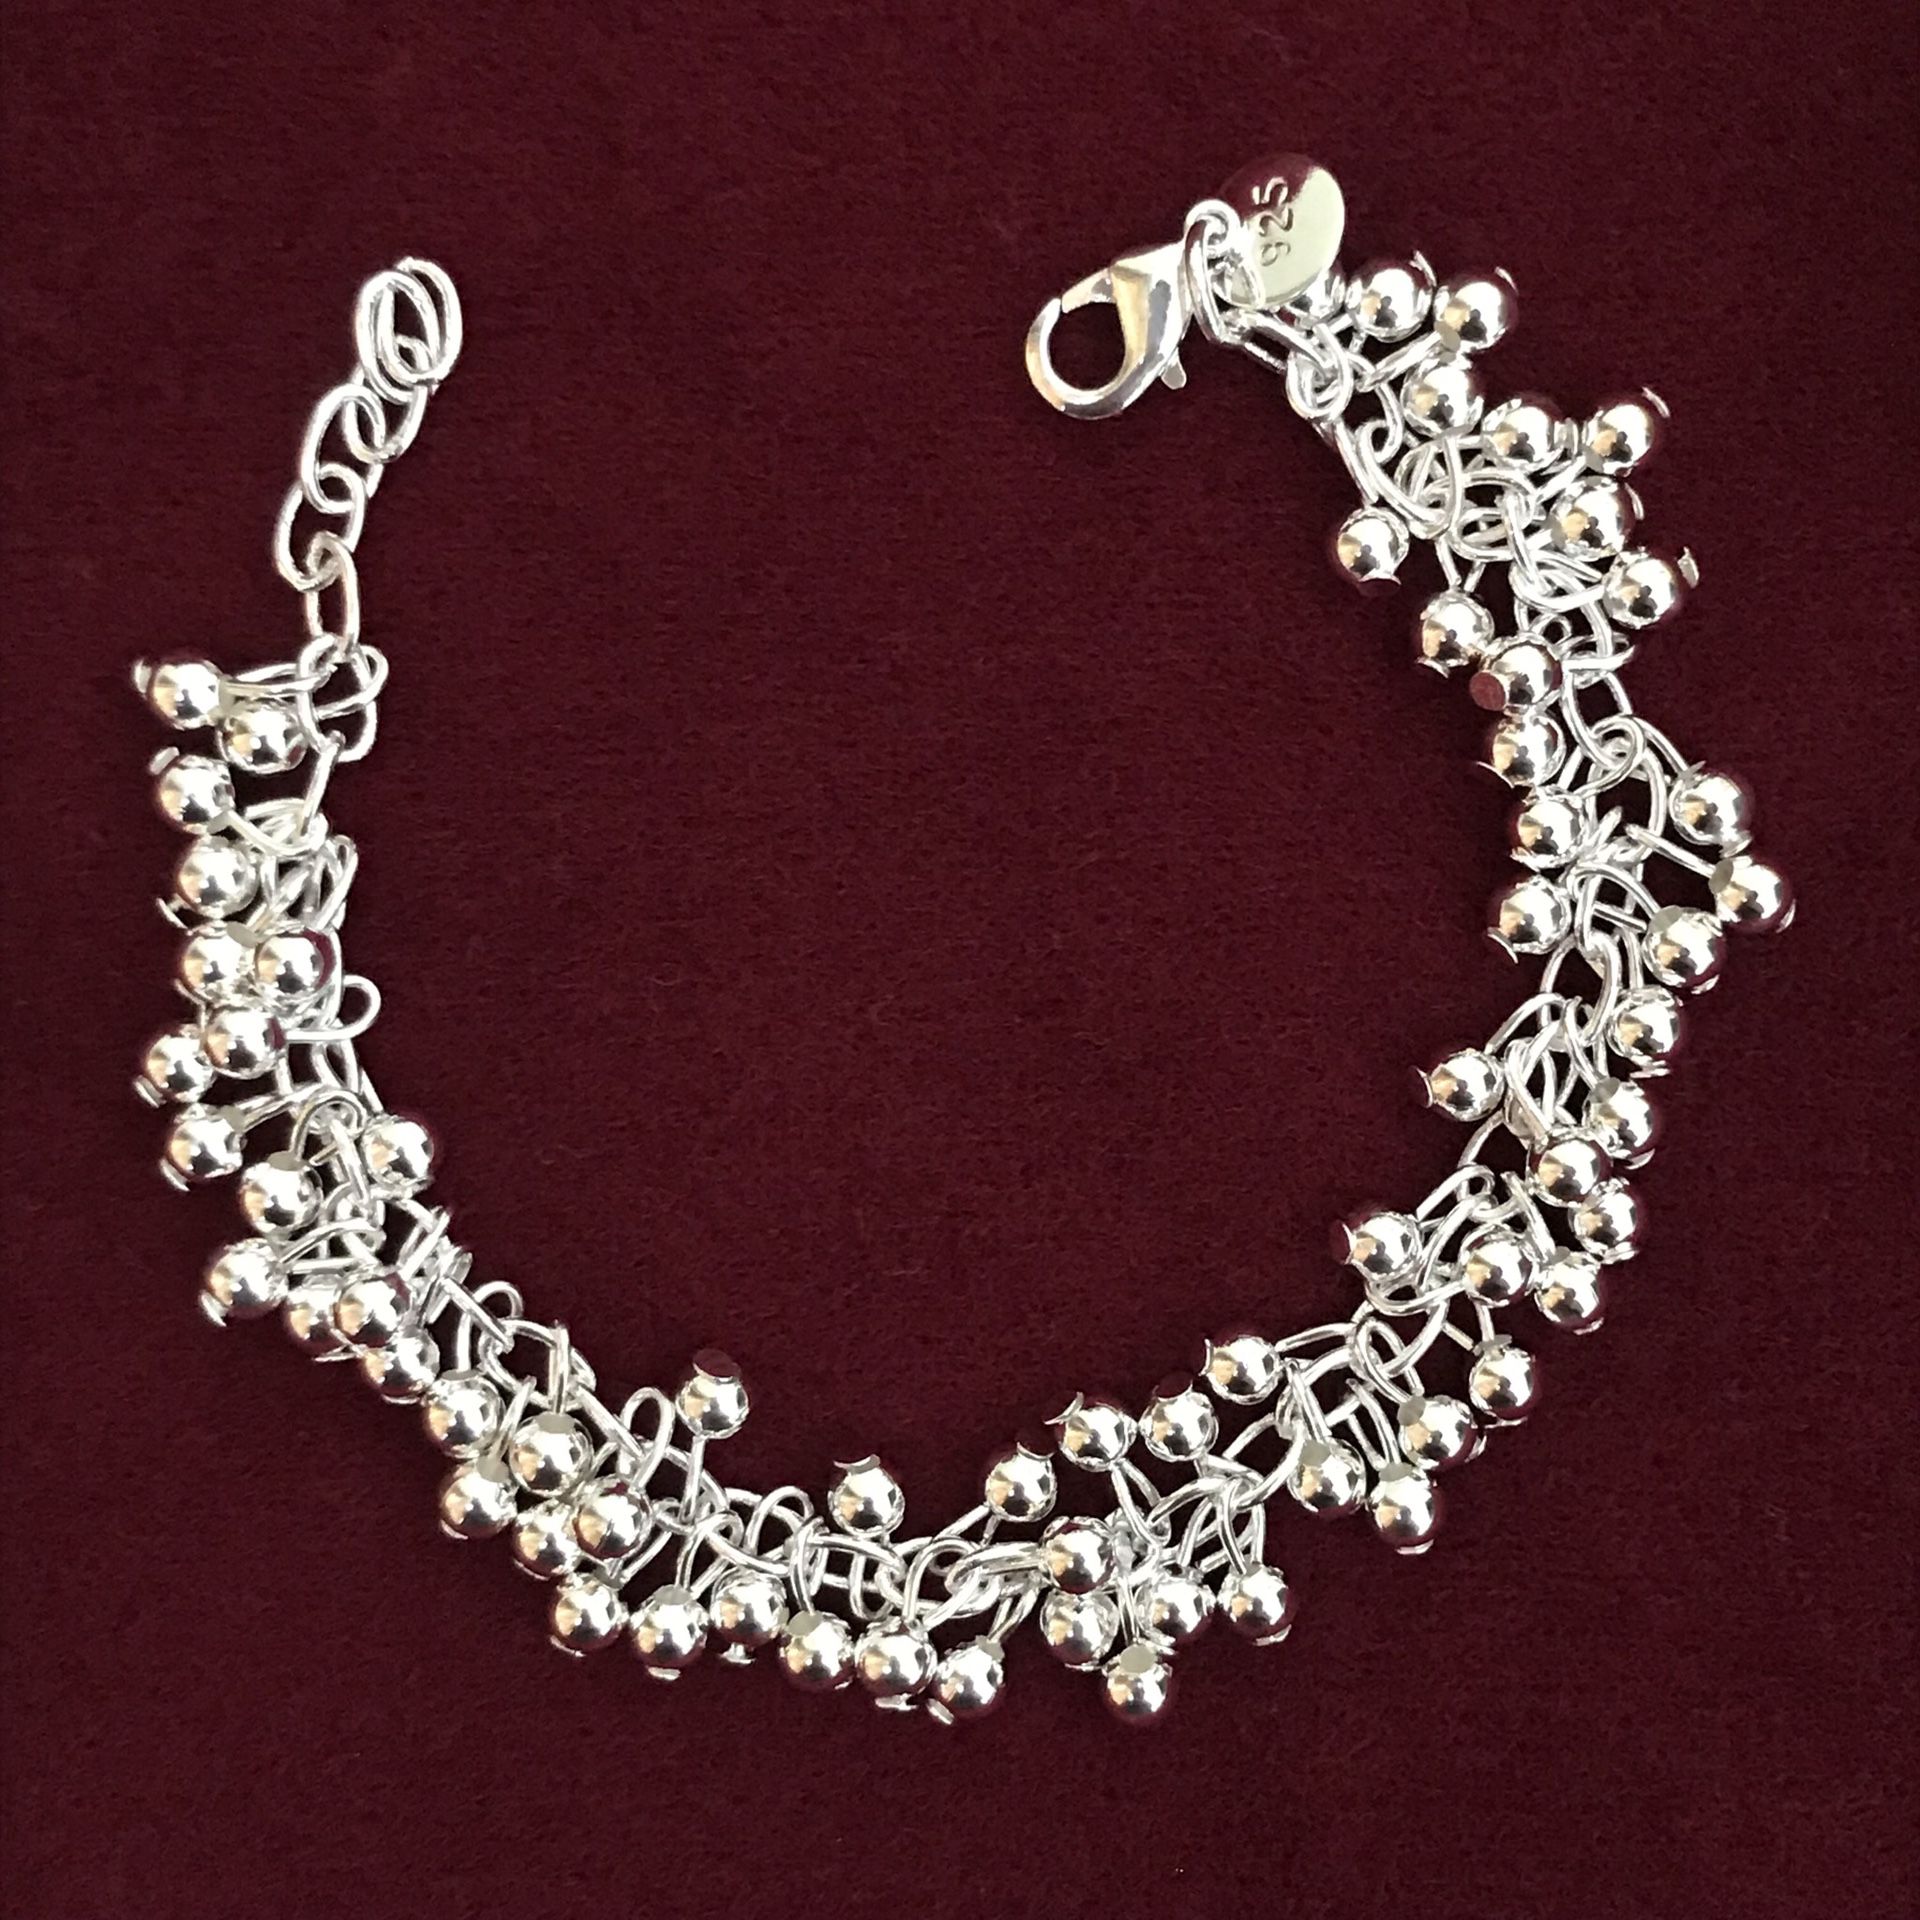 Sterling silver plated 925 stamped beads charm bracelet